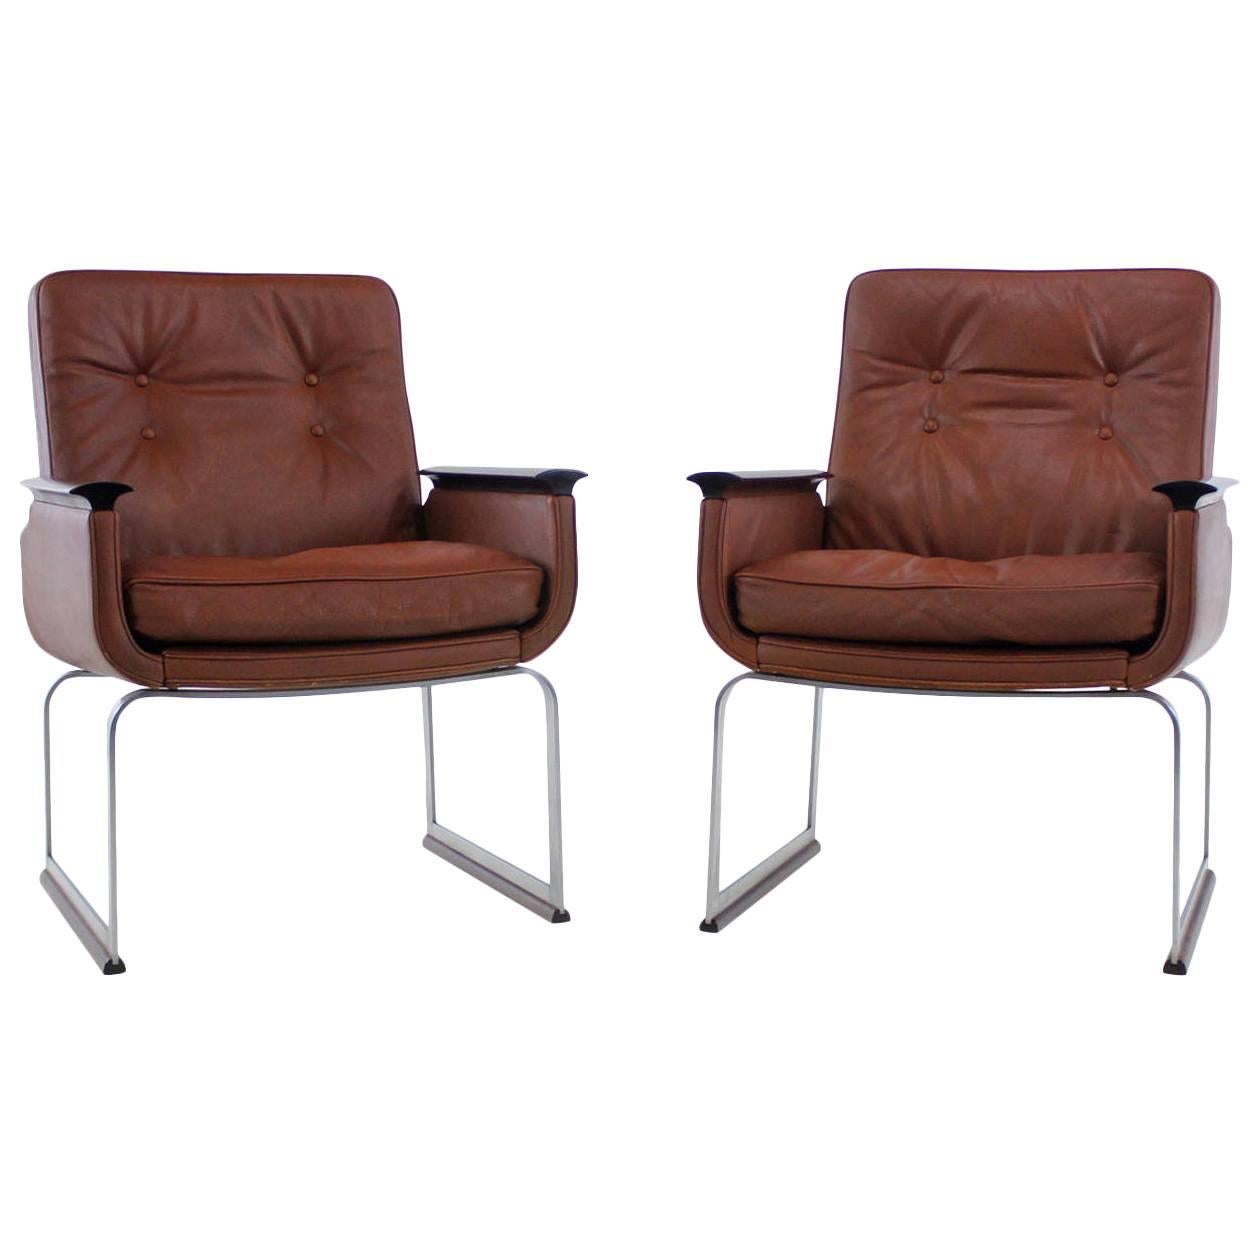 Pair of Danish Modern Steel and Leather Armchairs by Vatne Mobler For Sale